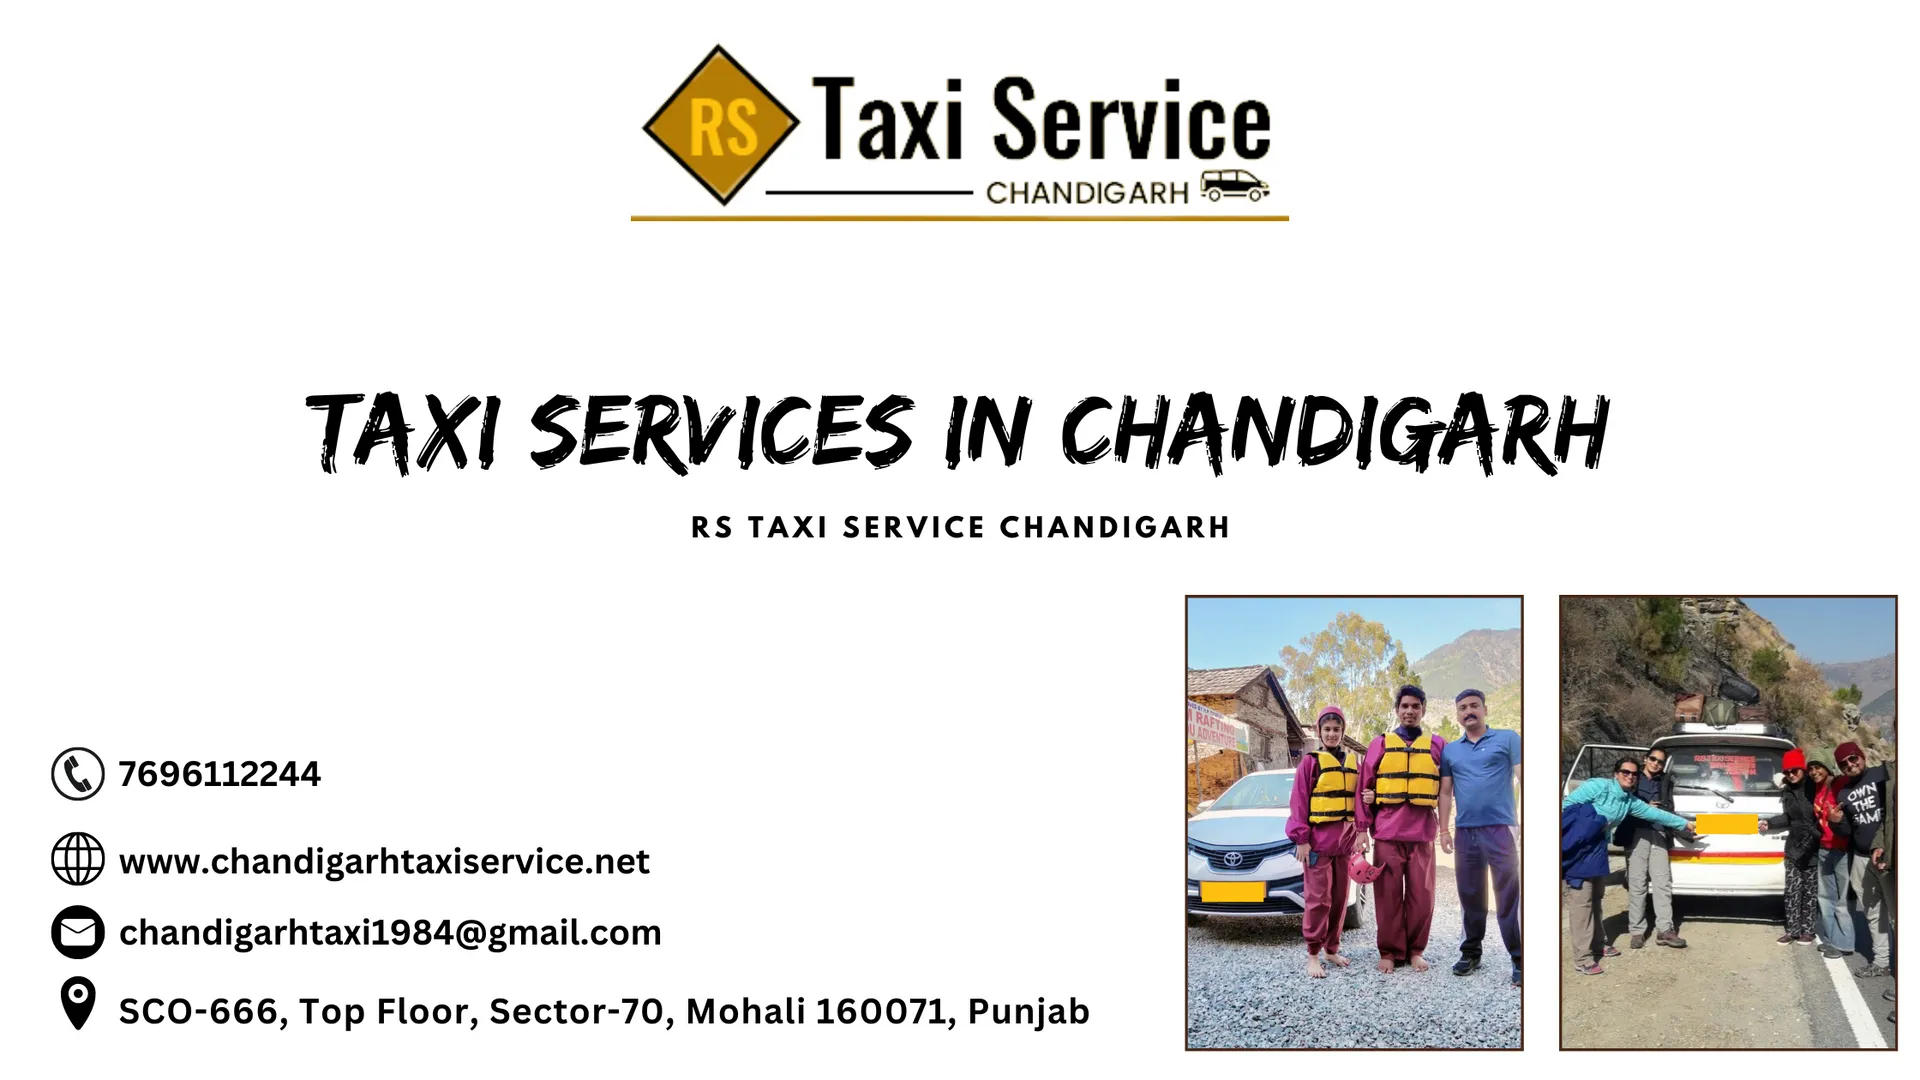 Step into the world of seamless and extraordinary travel experiences with RS Taxi Service Chandigarh! As the leading taxi service in this vibrant city, we take pride in offering a unique and personalized journey for every traveler.

What sets us apart is our commitment to providing not just transportation but also creating cherished memories. Our well-maintained fleet of comfortable vehicles caters to all your needs, ensuring a smooth ride whether you're exploring the city alone, vacationing with family, or on a corporate trip.

Book your ride today and let us take care of your transportation needs while you immerse yourself in the beauty and culture of Chandigarh. Experience a journey like never before with RS Taxi Service Chandigarh! https://www.chandigarhtaxiservice.net/